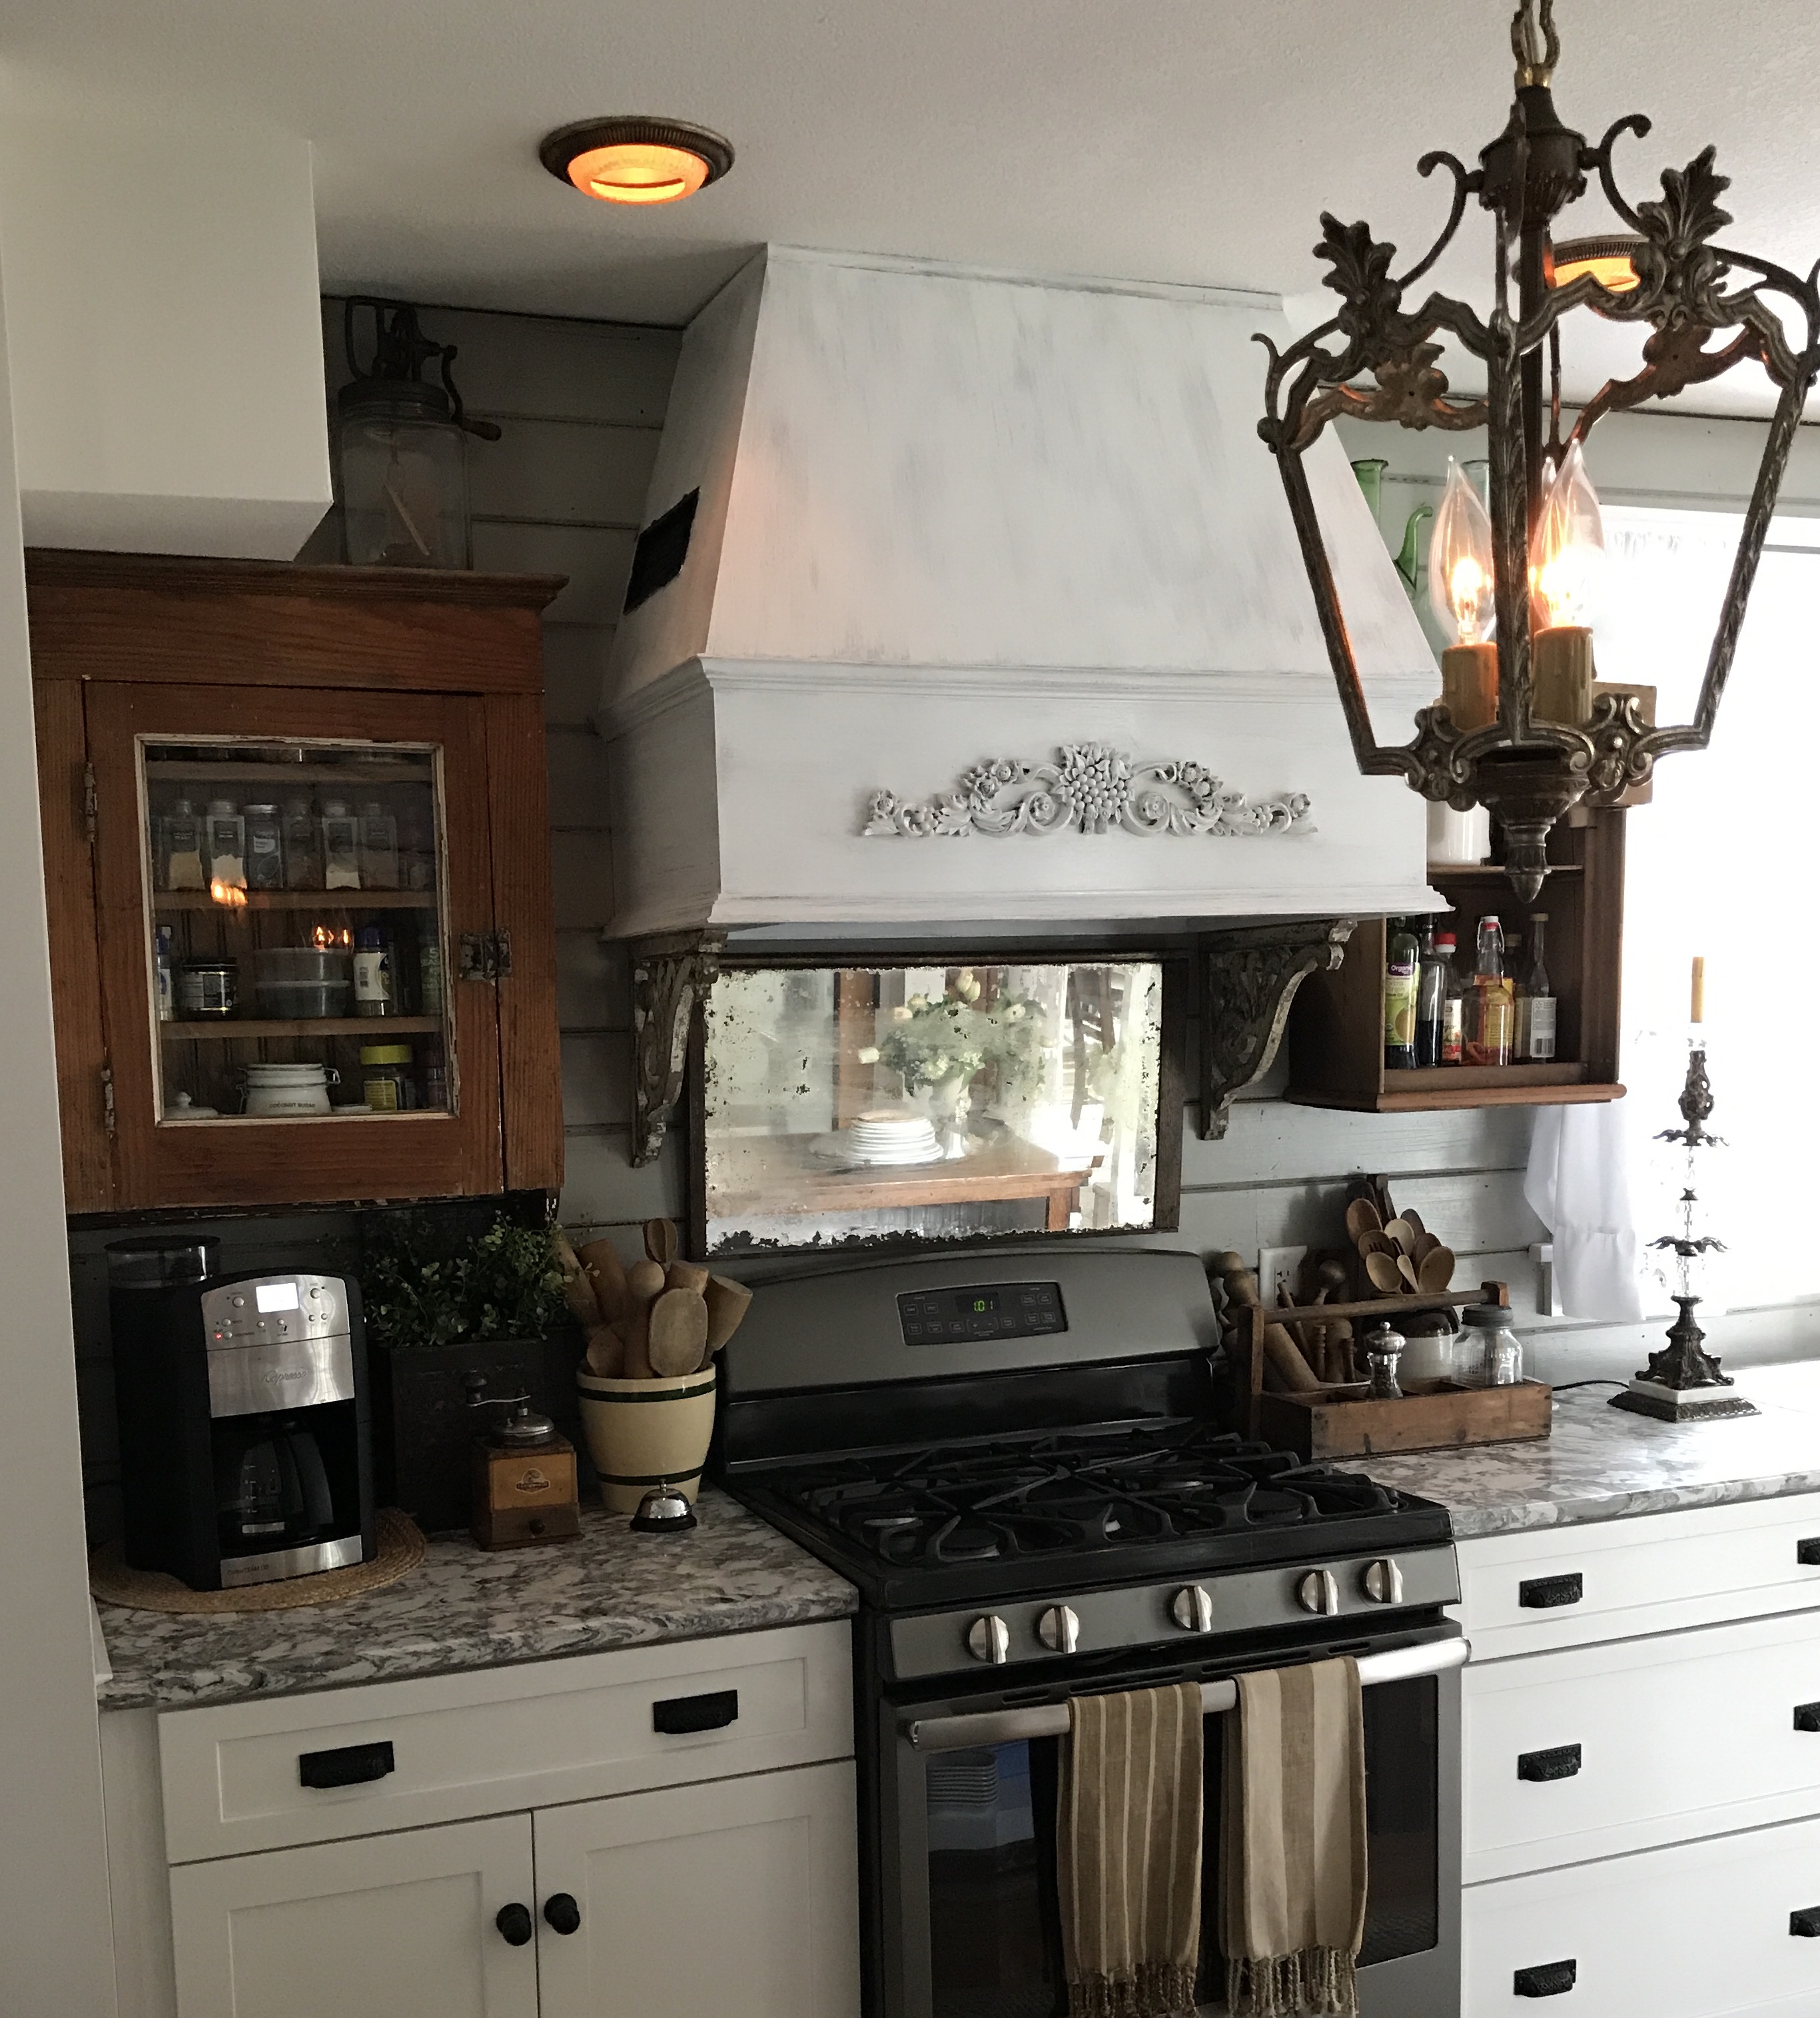 Large range hood and antique spice cabinet - House on Winchester